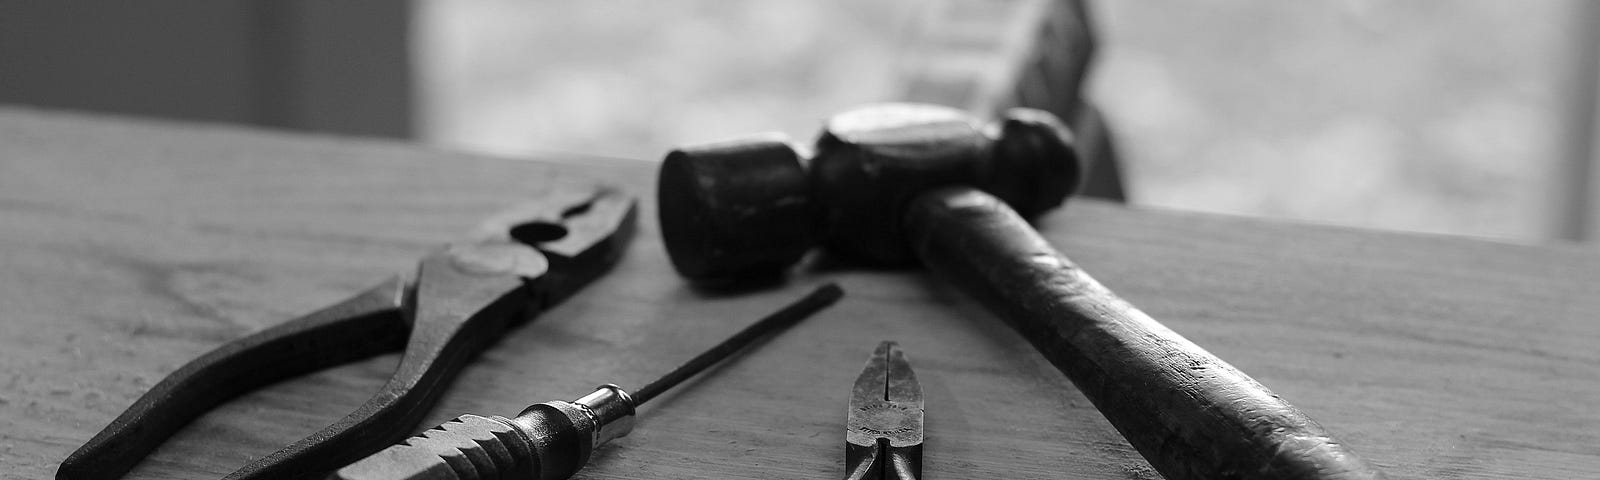 A photo of some tools on a workbench to represent workers